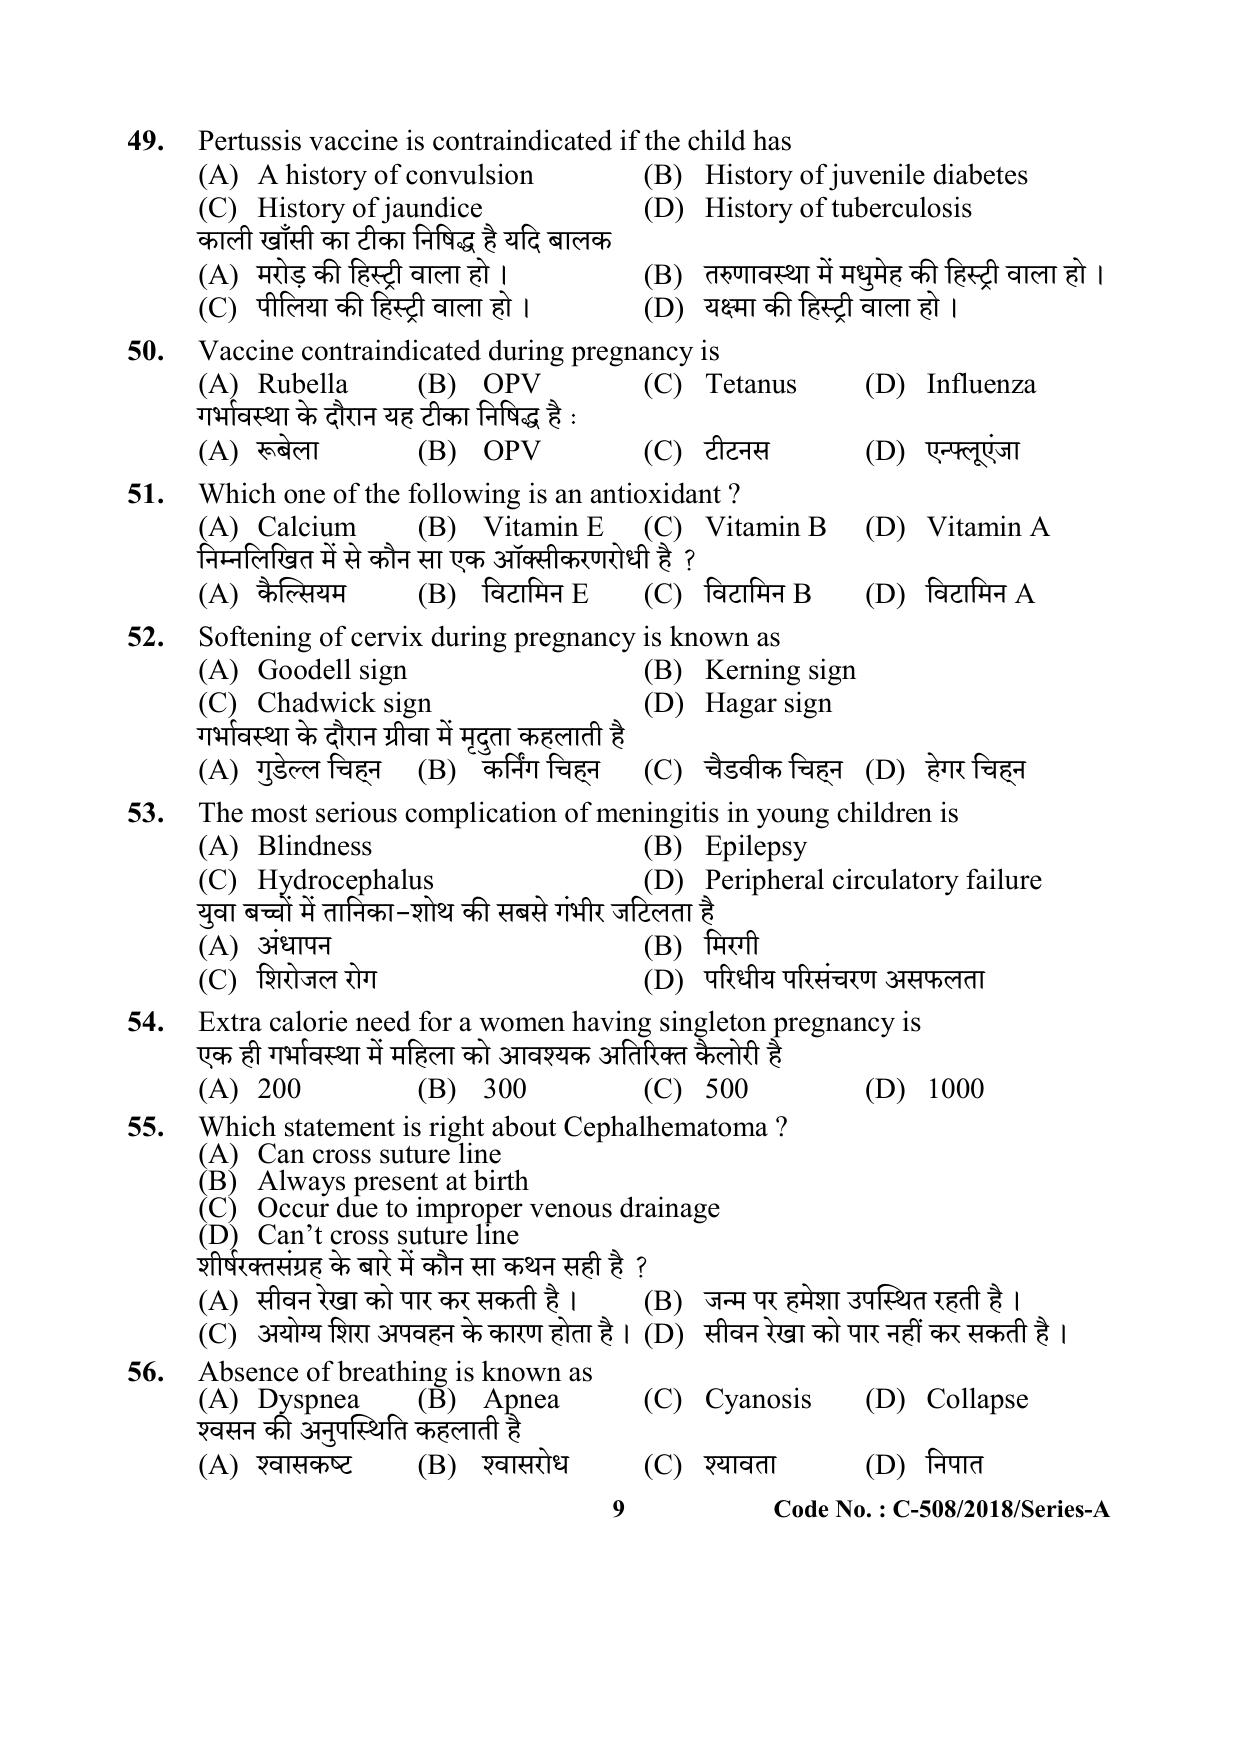 UP Health Worker Thematic Knowledge Previous Year Question Paper - Page 9